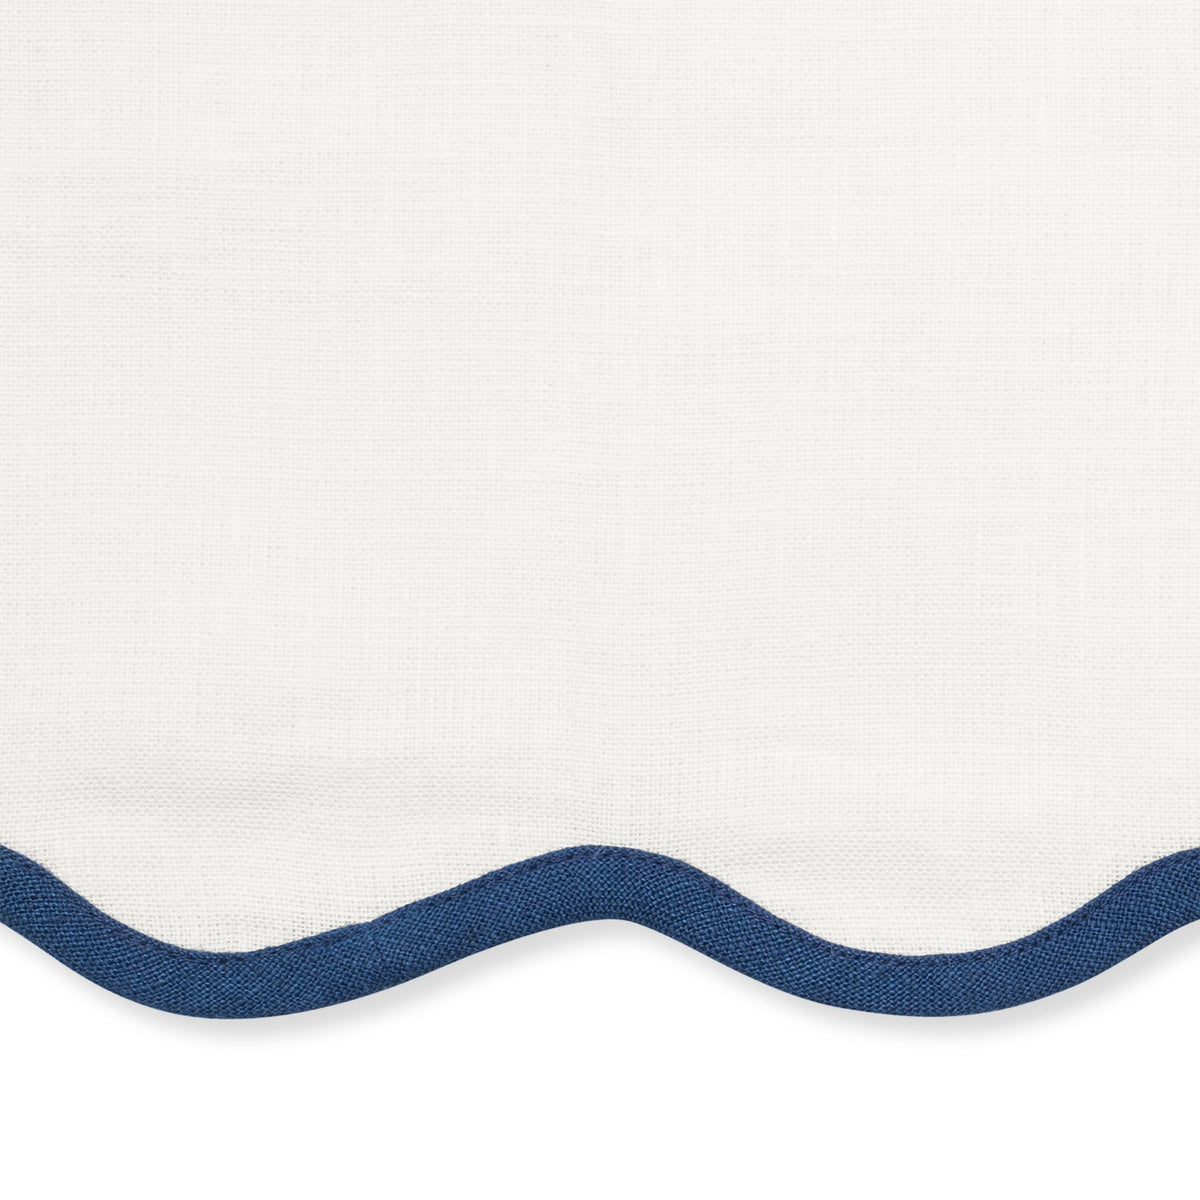 Swatch Sample of Matouk Scallop Edge Table Linens in Sapphire Color